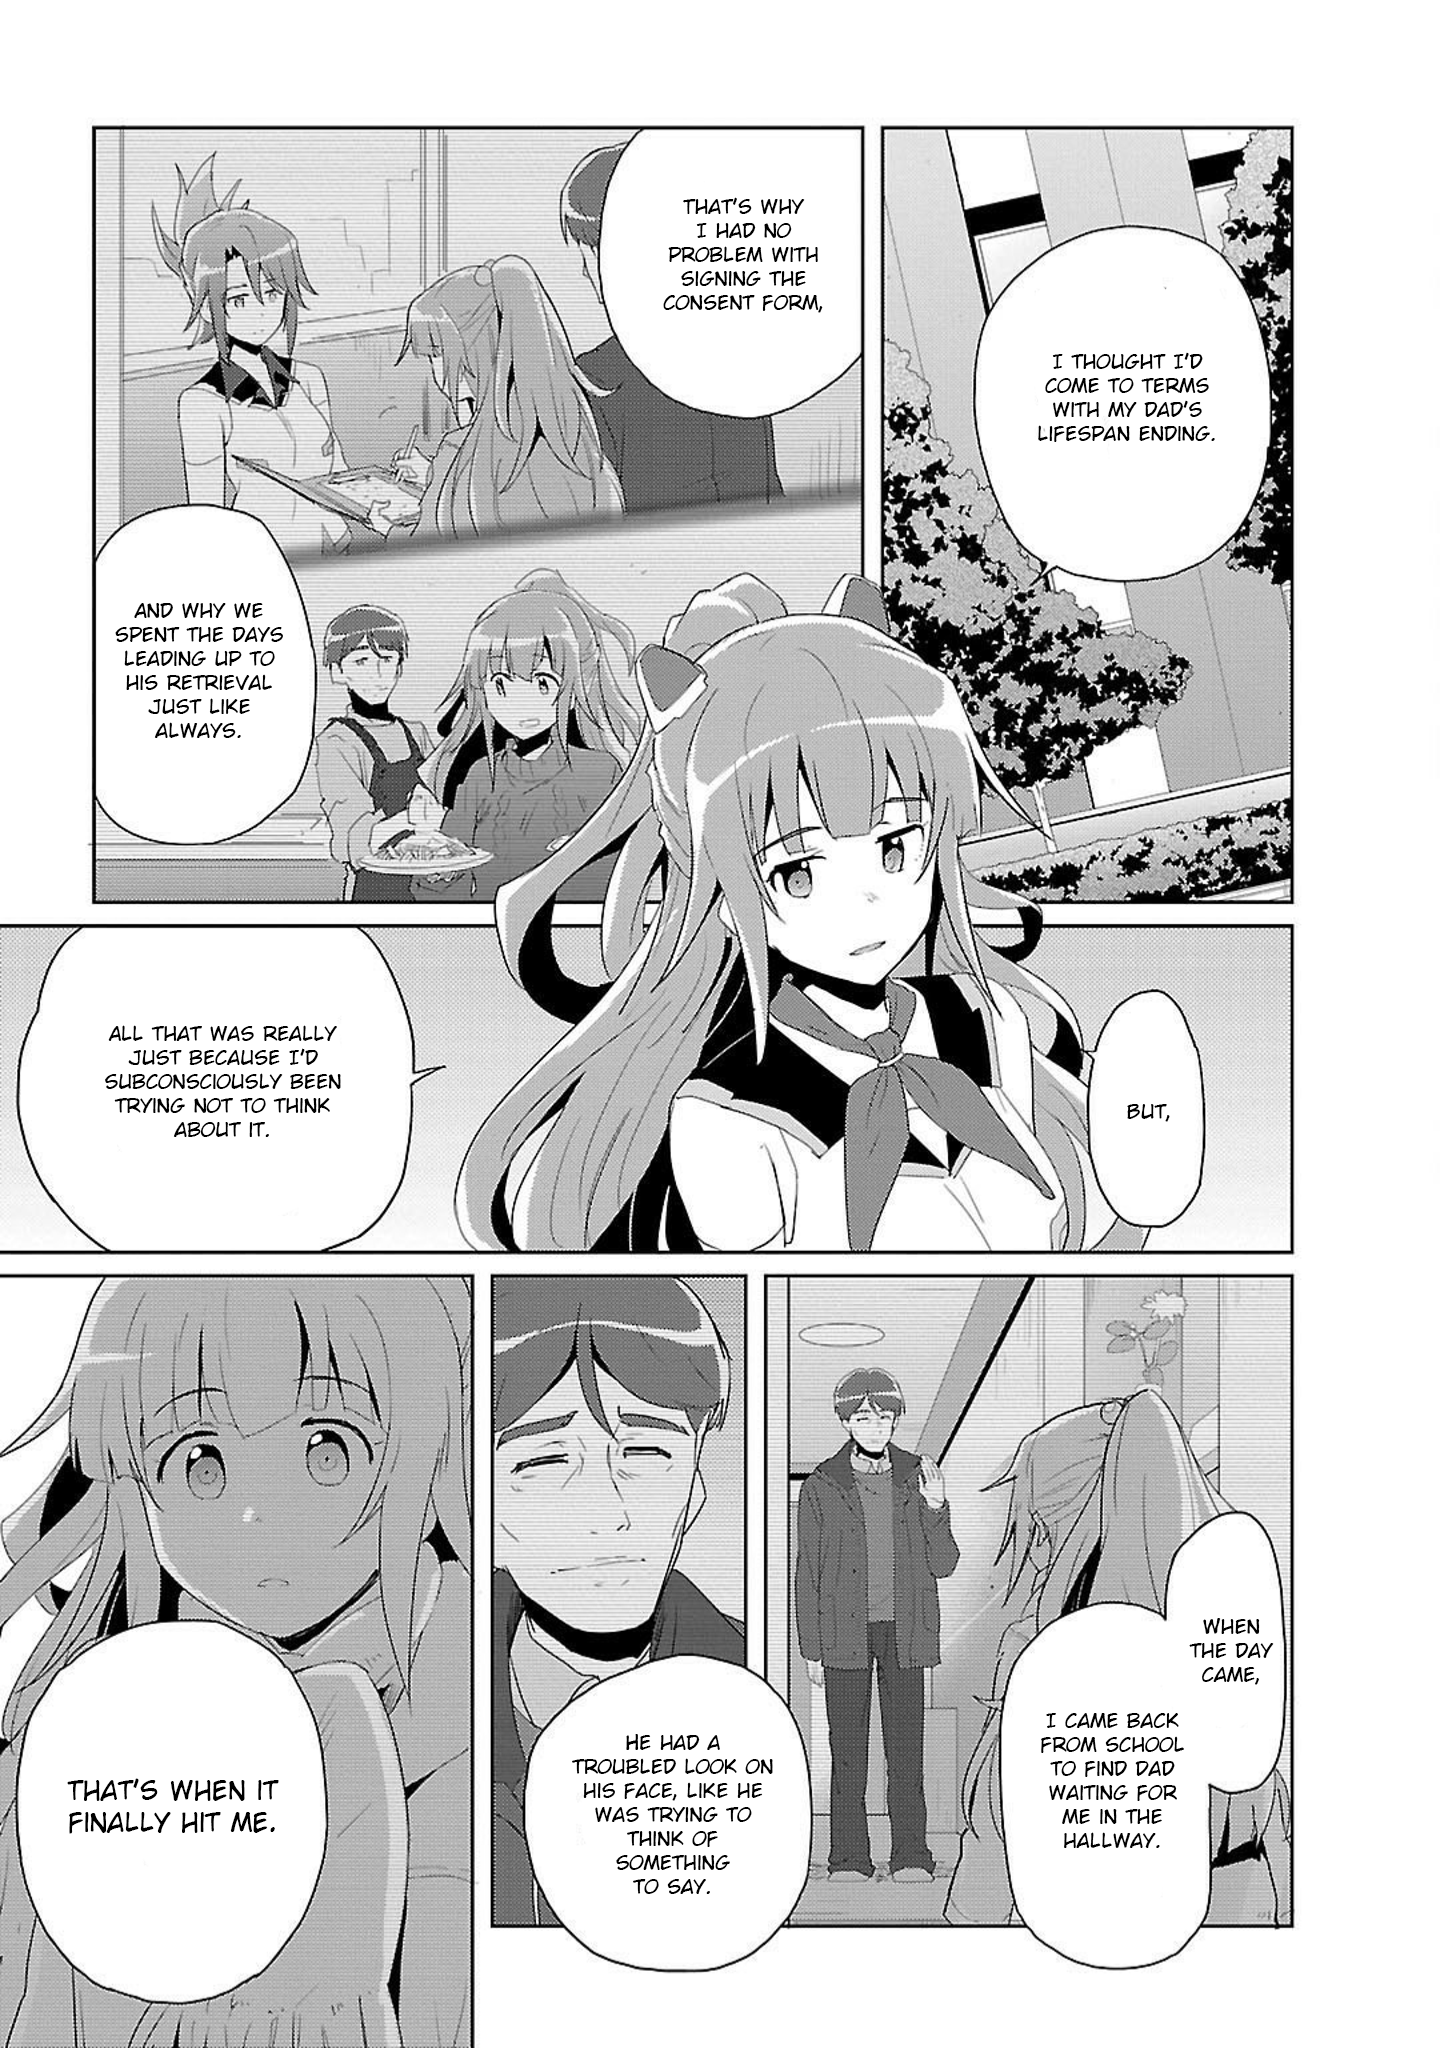 Plastic Memories - Say To Good-Bye Vol.2 Chapter 11: Memories: 11 - Picture 3